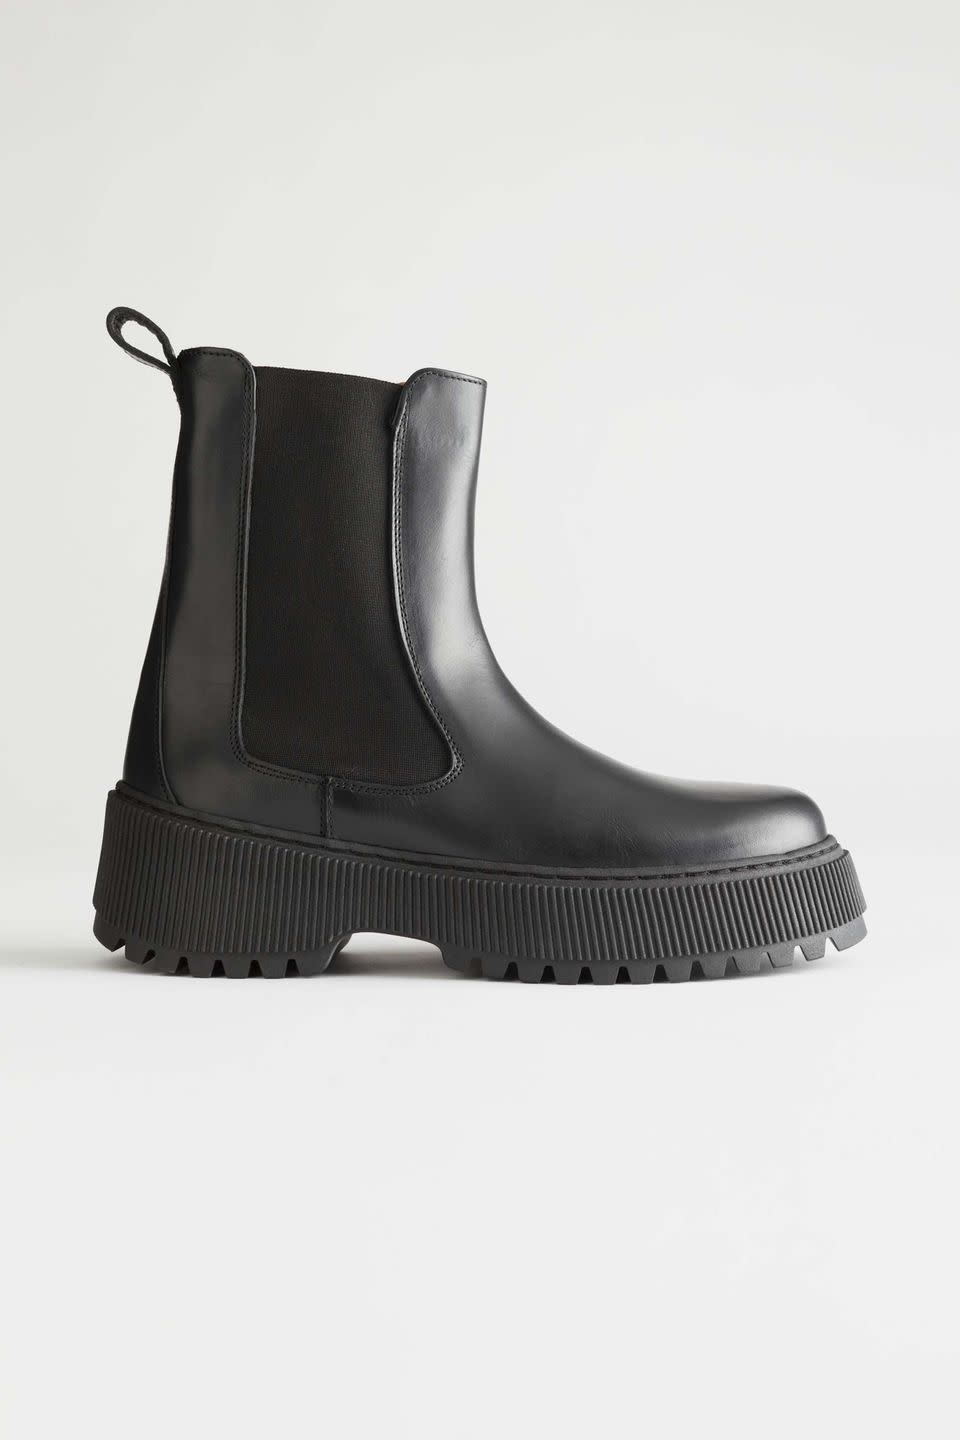 7) The Chelsea boot